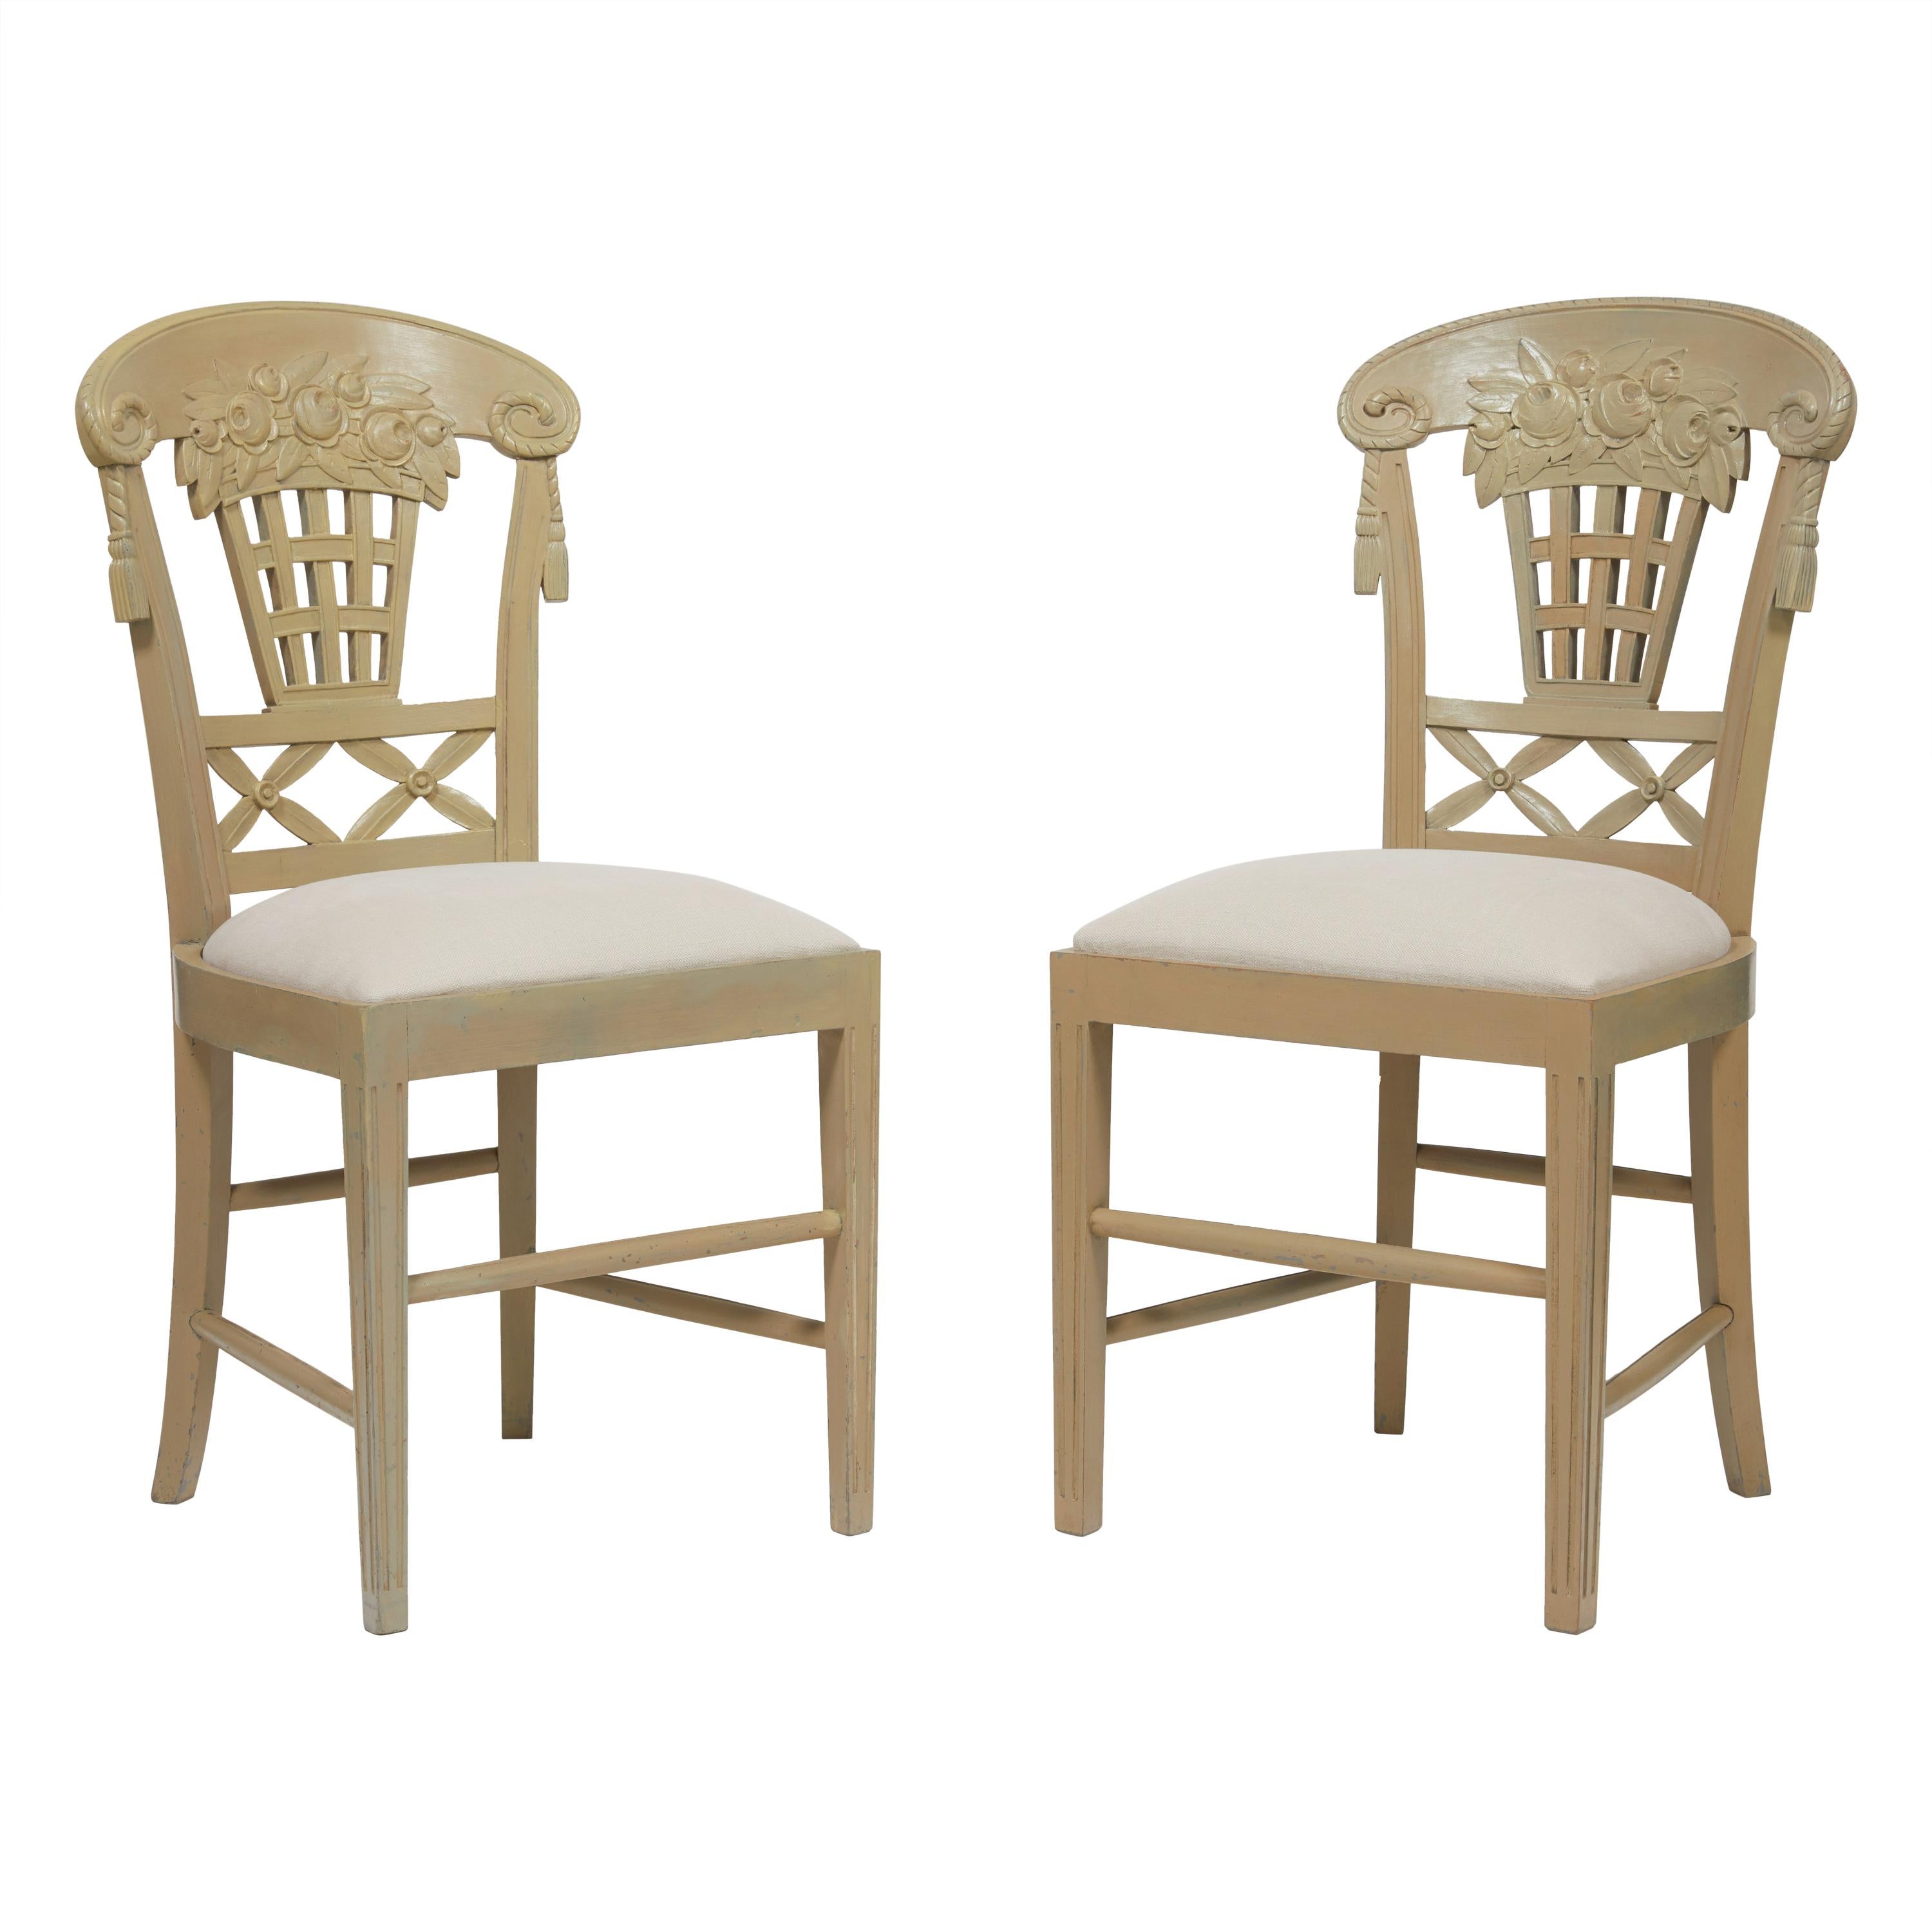 André Groult, Set of Two Chairs Carved from Louis Sue's Drawings, circa 1912